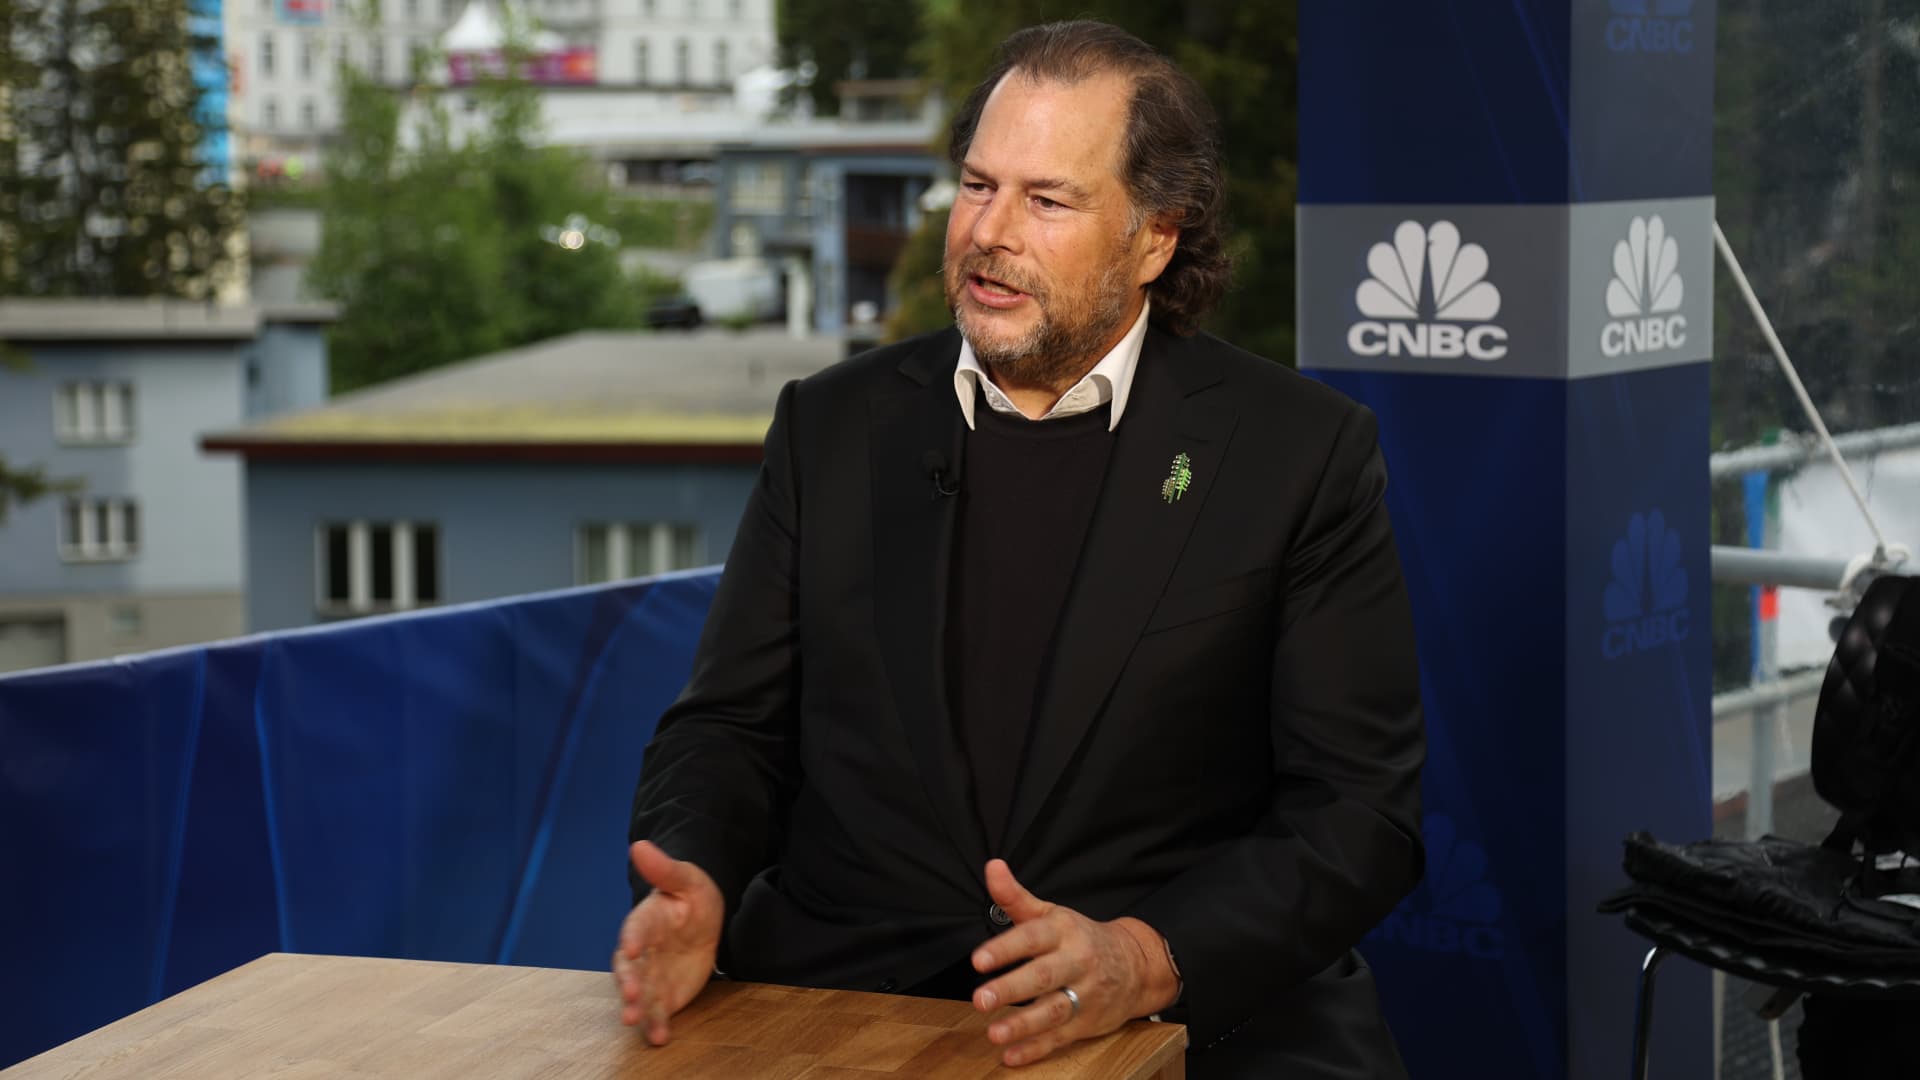 Salesforce’s Benioff laments co-CEO ‘gut punch’ exit, as shares fall. But we're sticking with the stock